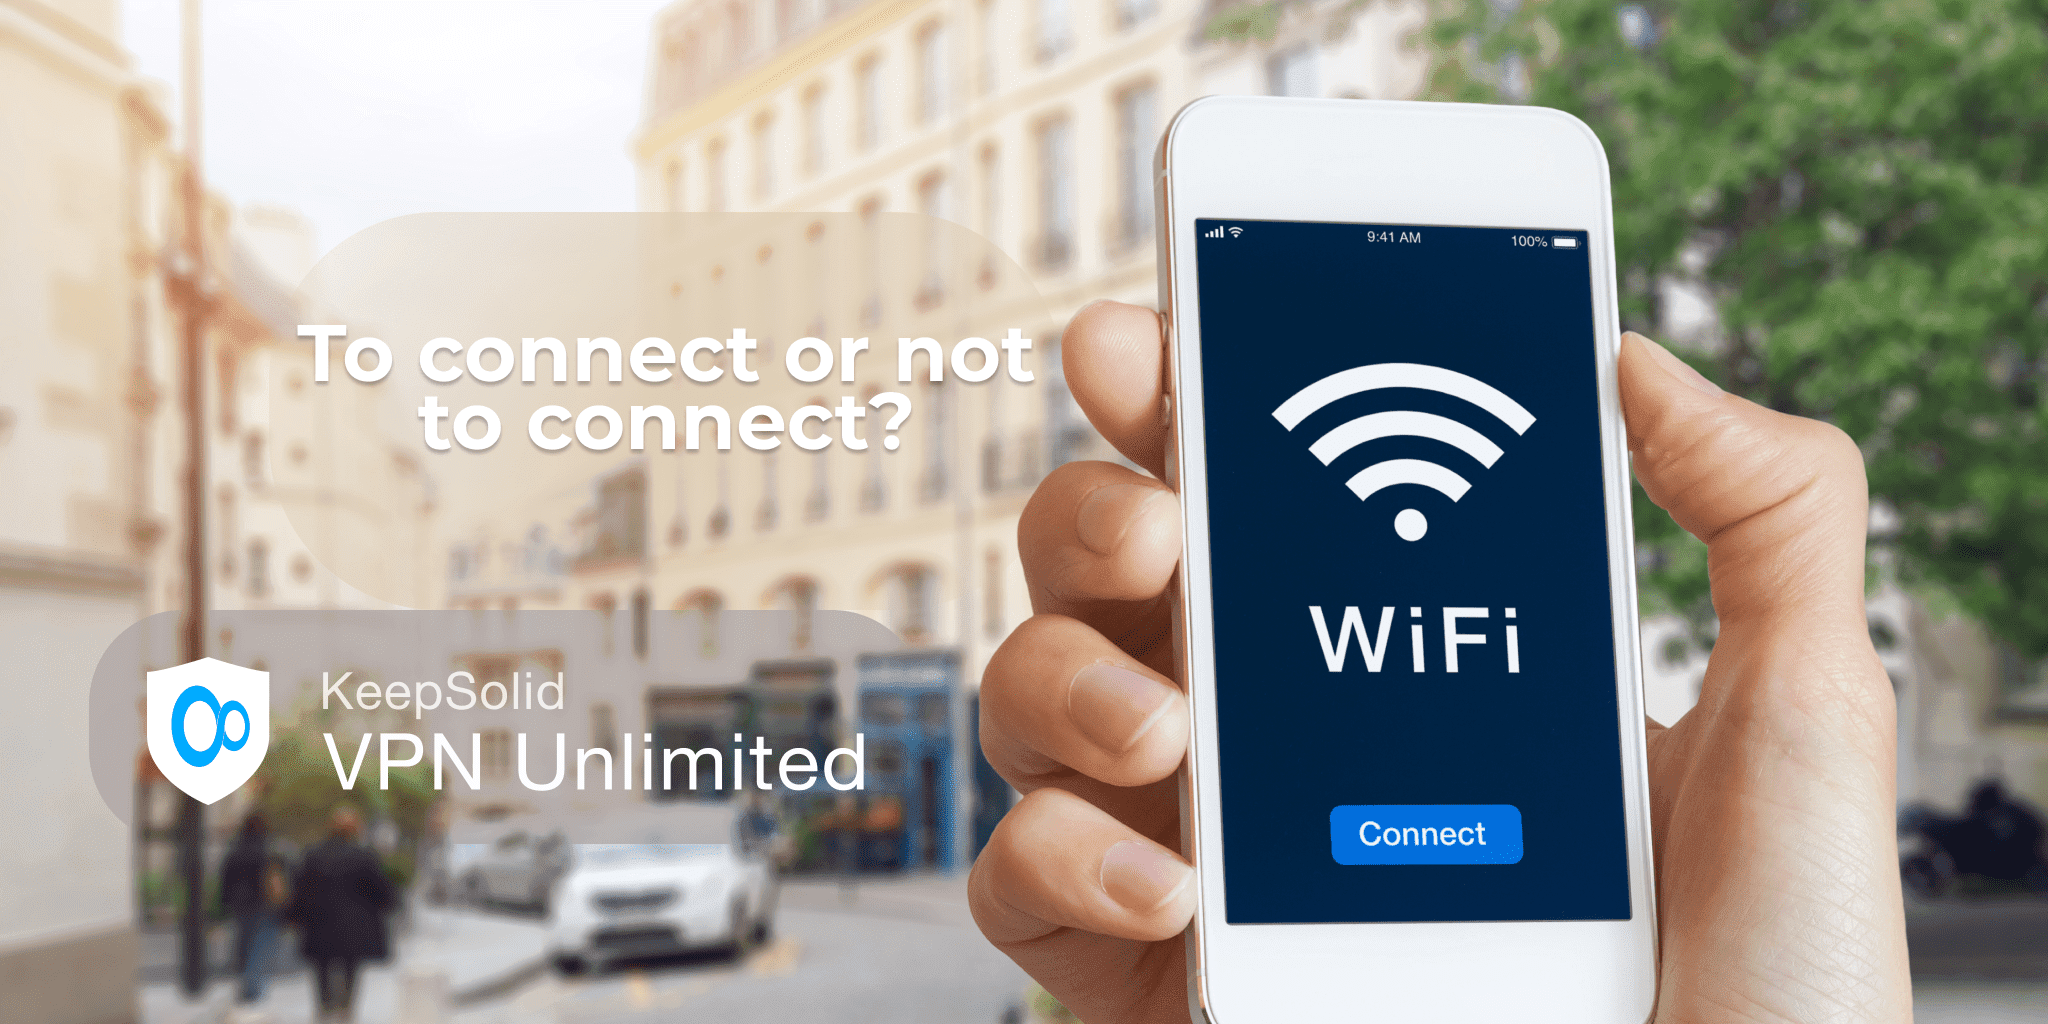 Connection to free public WiFi hotspot in the city street to access internet on iPhone